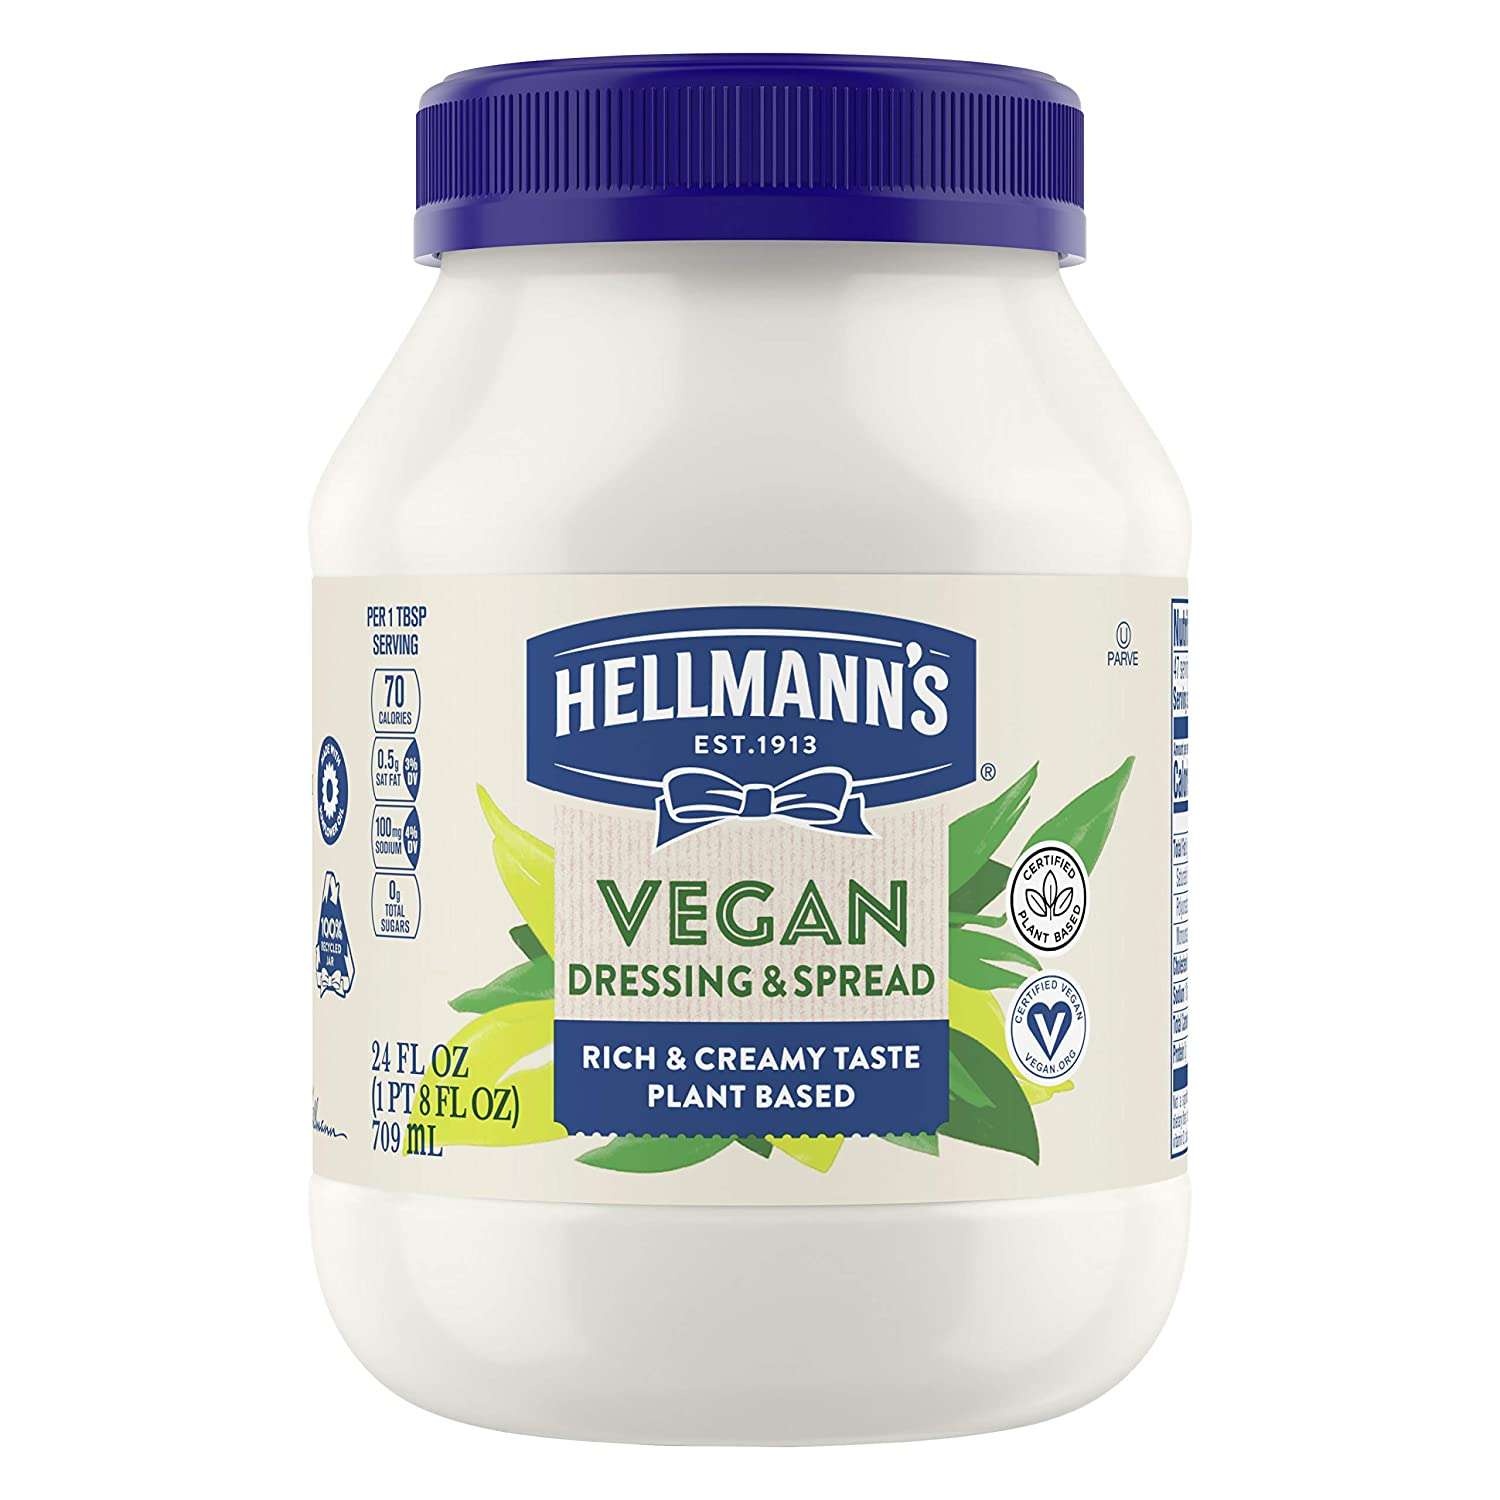 Hellmann’s Vegan Dressing and Spread for A Rich, Creamy Plant-Based Alternative to Mayonnaise Vegan Dressing and Spread Plant Based Alternative to Mayo Free From Eggs 24 oz